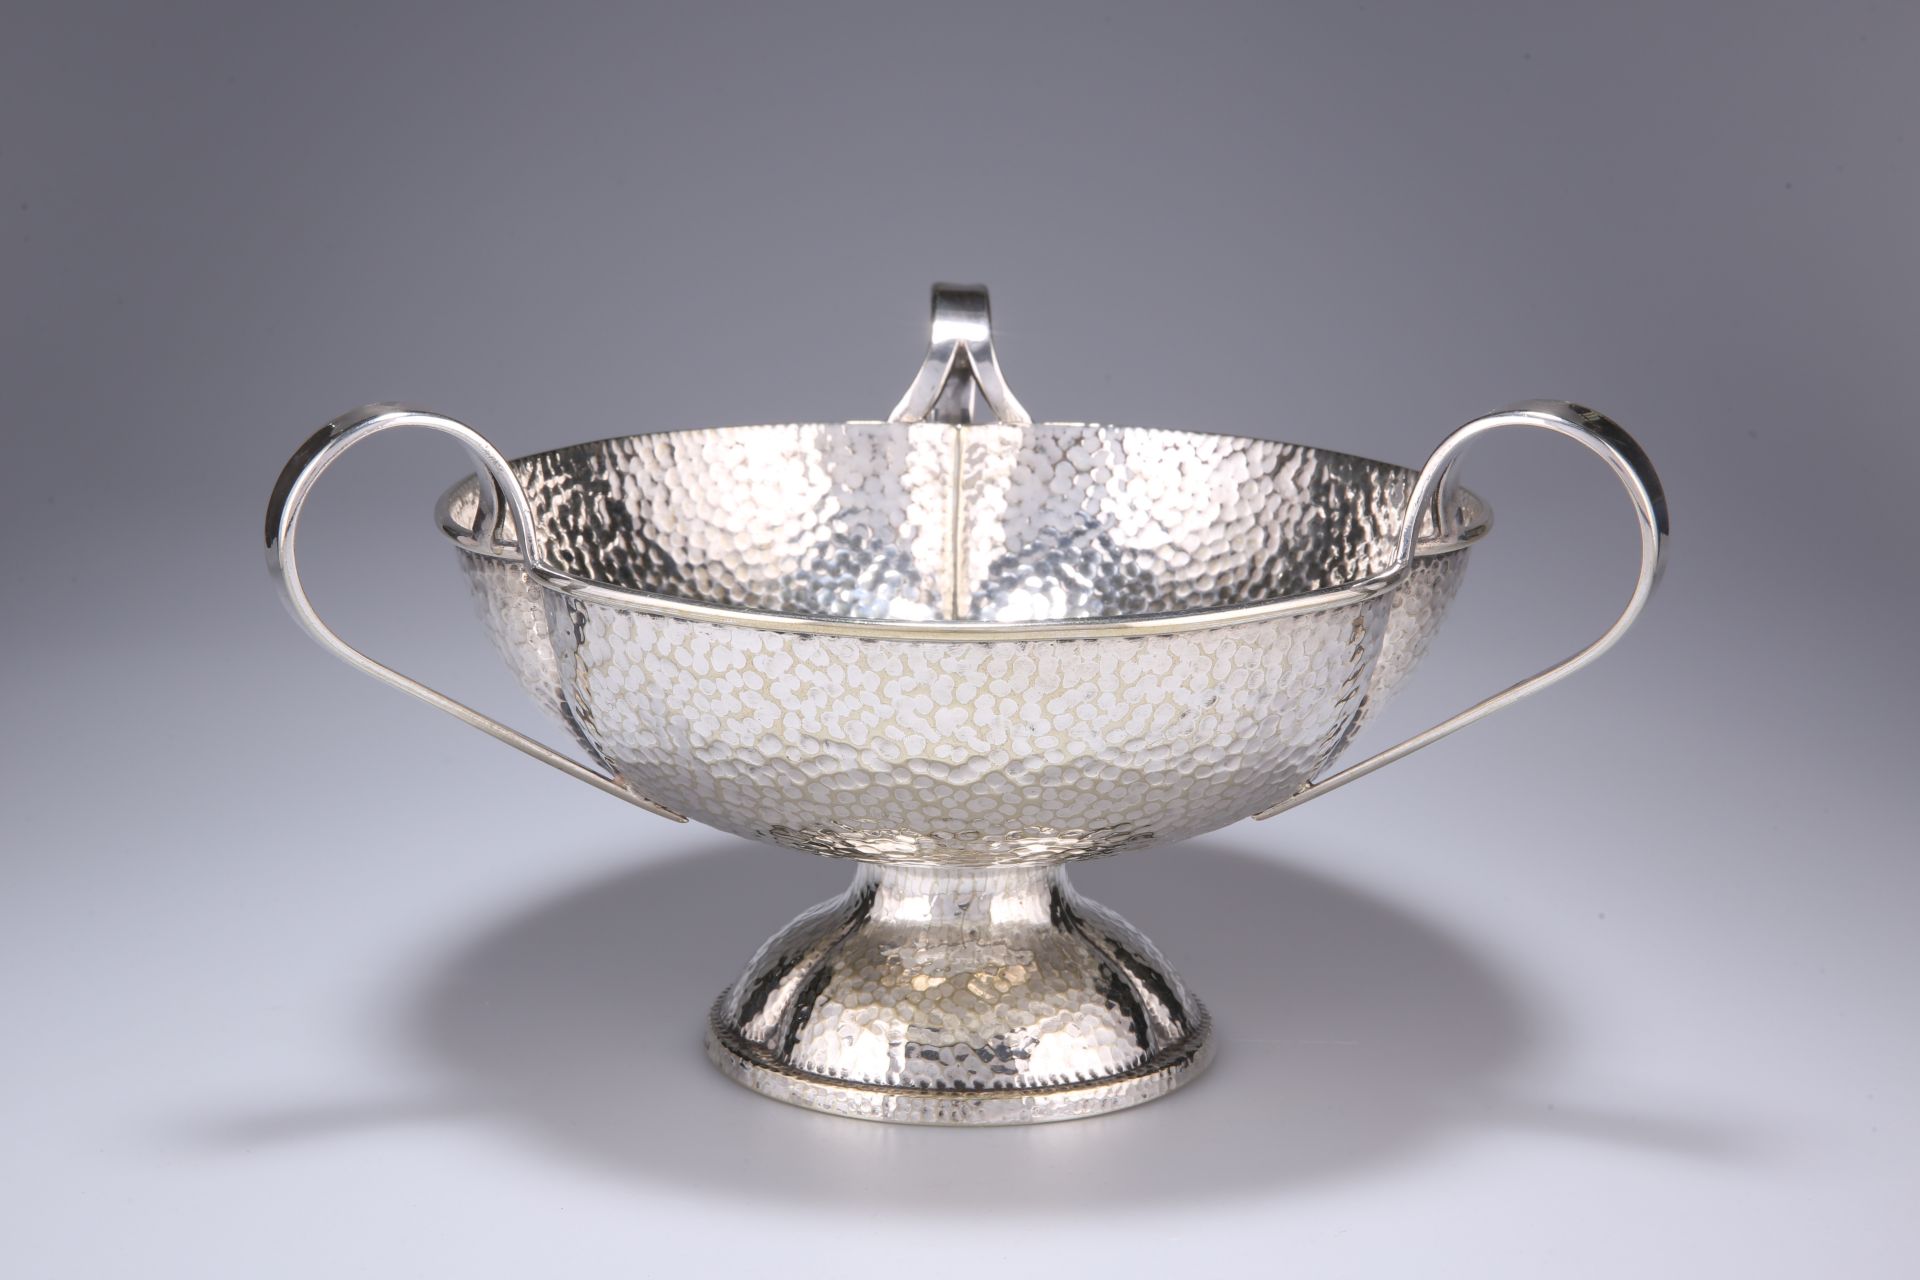 AN ART NOUVEAU SILVER-PLATED THREE-HANDLED TAZZA - Image 2 of 3